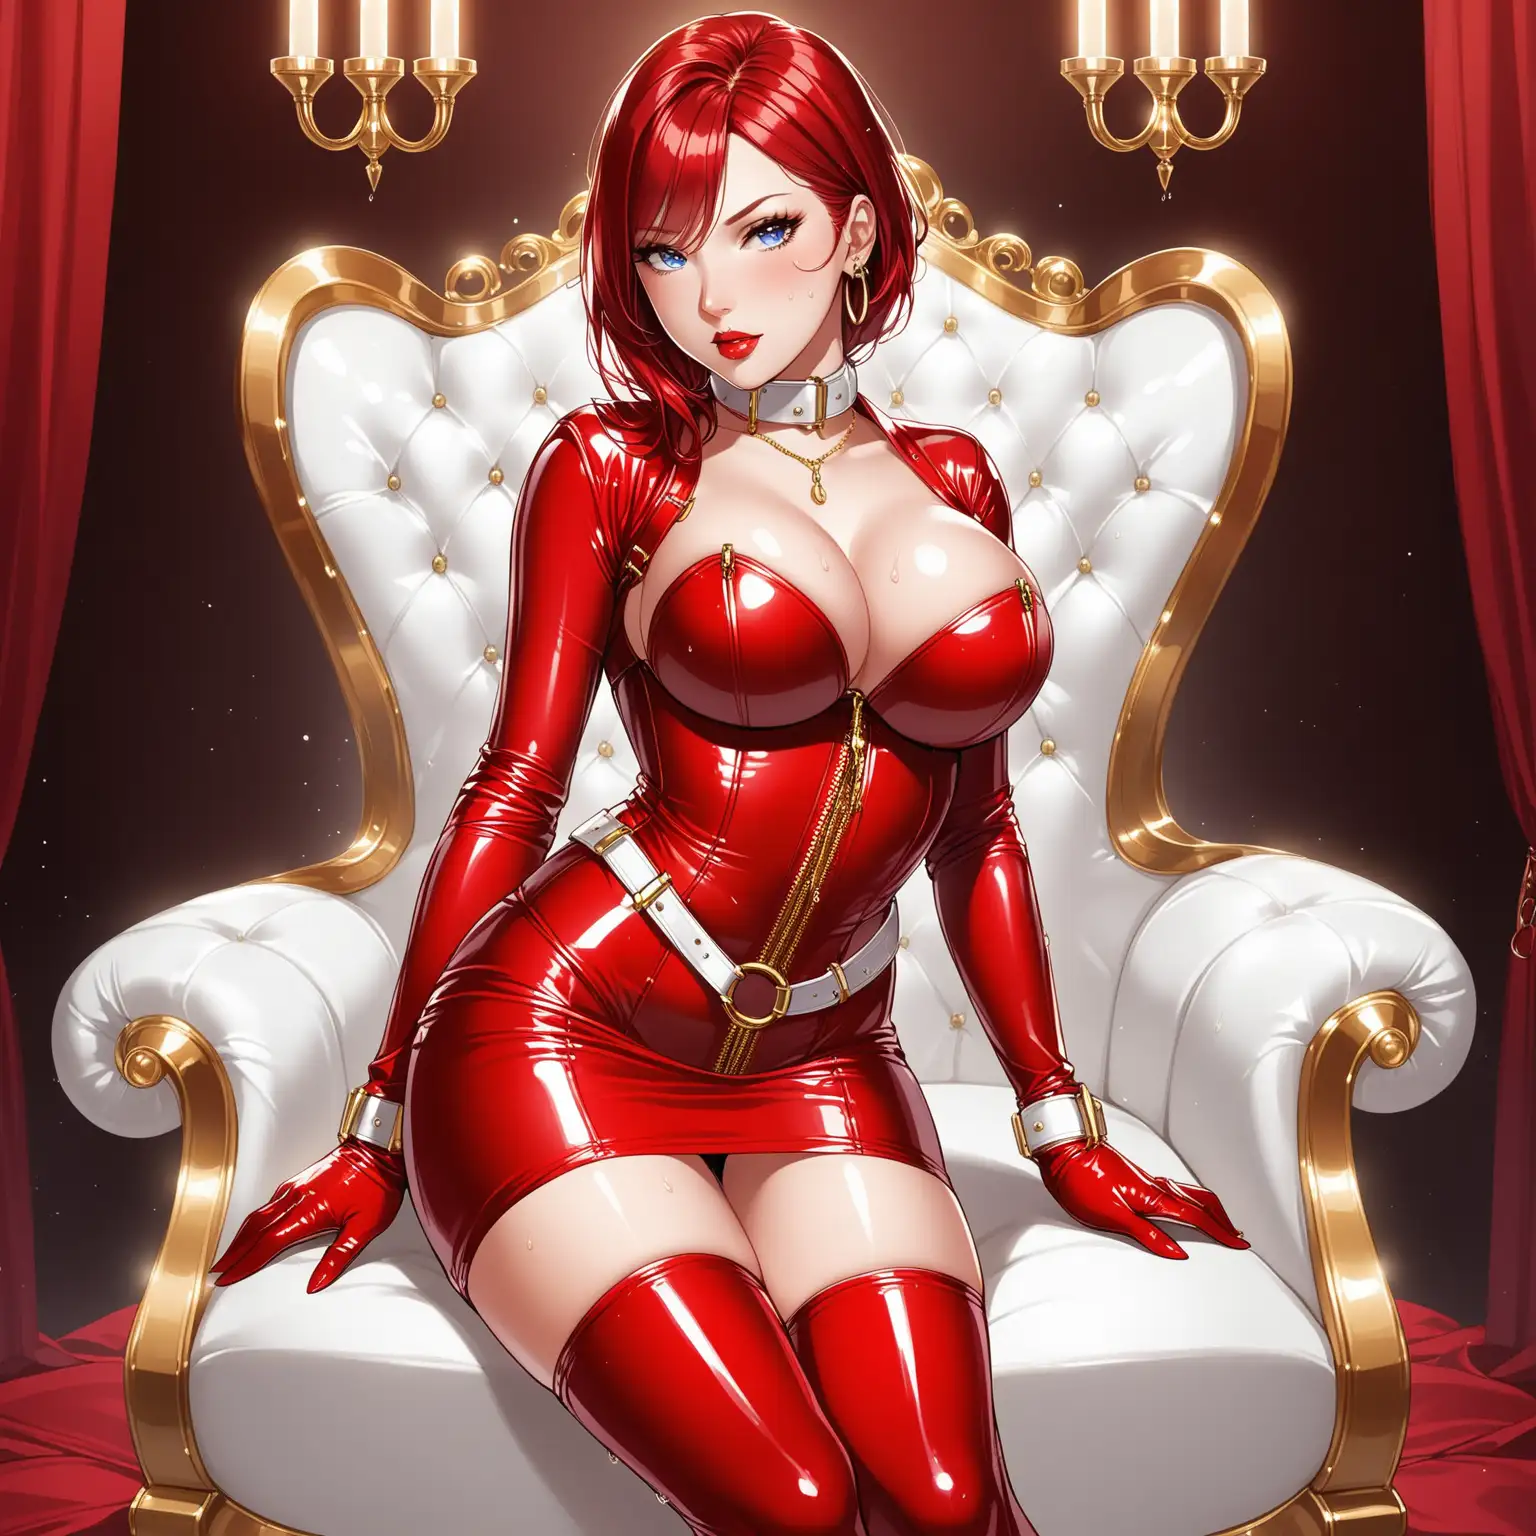 1 woman. She is 30 years old with blue eyes. She has short length red hair. She has big tits and is thin and fit. She is wearing a tight red latex corset, short skirt, very long gloves, high heels, gold jewelry, bdsm wrist restraints and a thick red latex bondage collar with a ring. She is mature and elegant and has shiny red lipstick on. She has a seductive expression. She is in a mansion with white leather furniture with gold accents. She does not look young, she looks middle aged. She is not sweaty or wet.